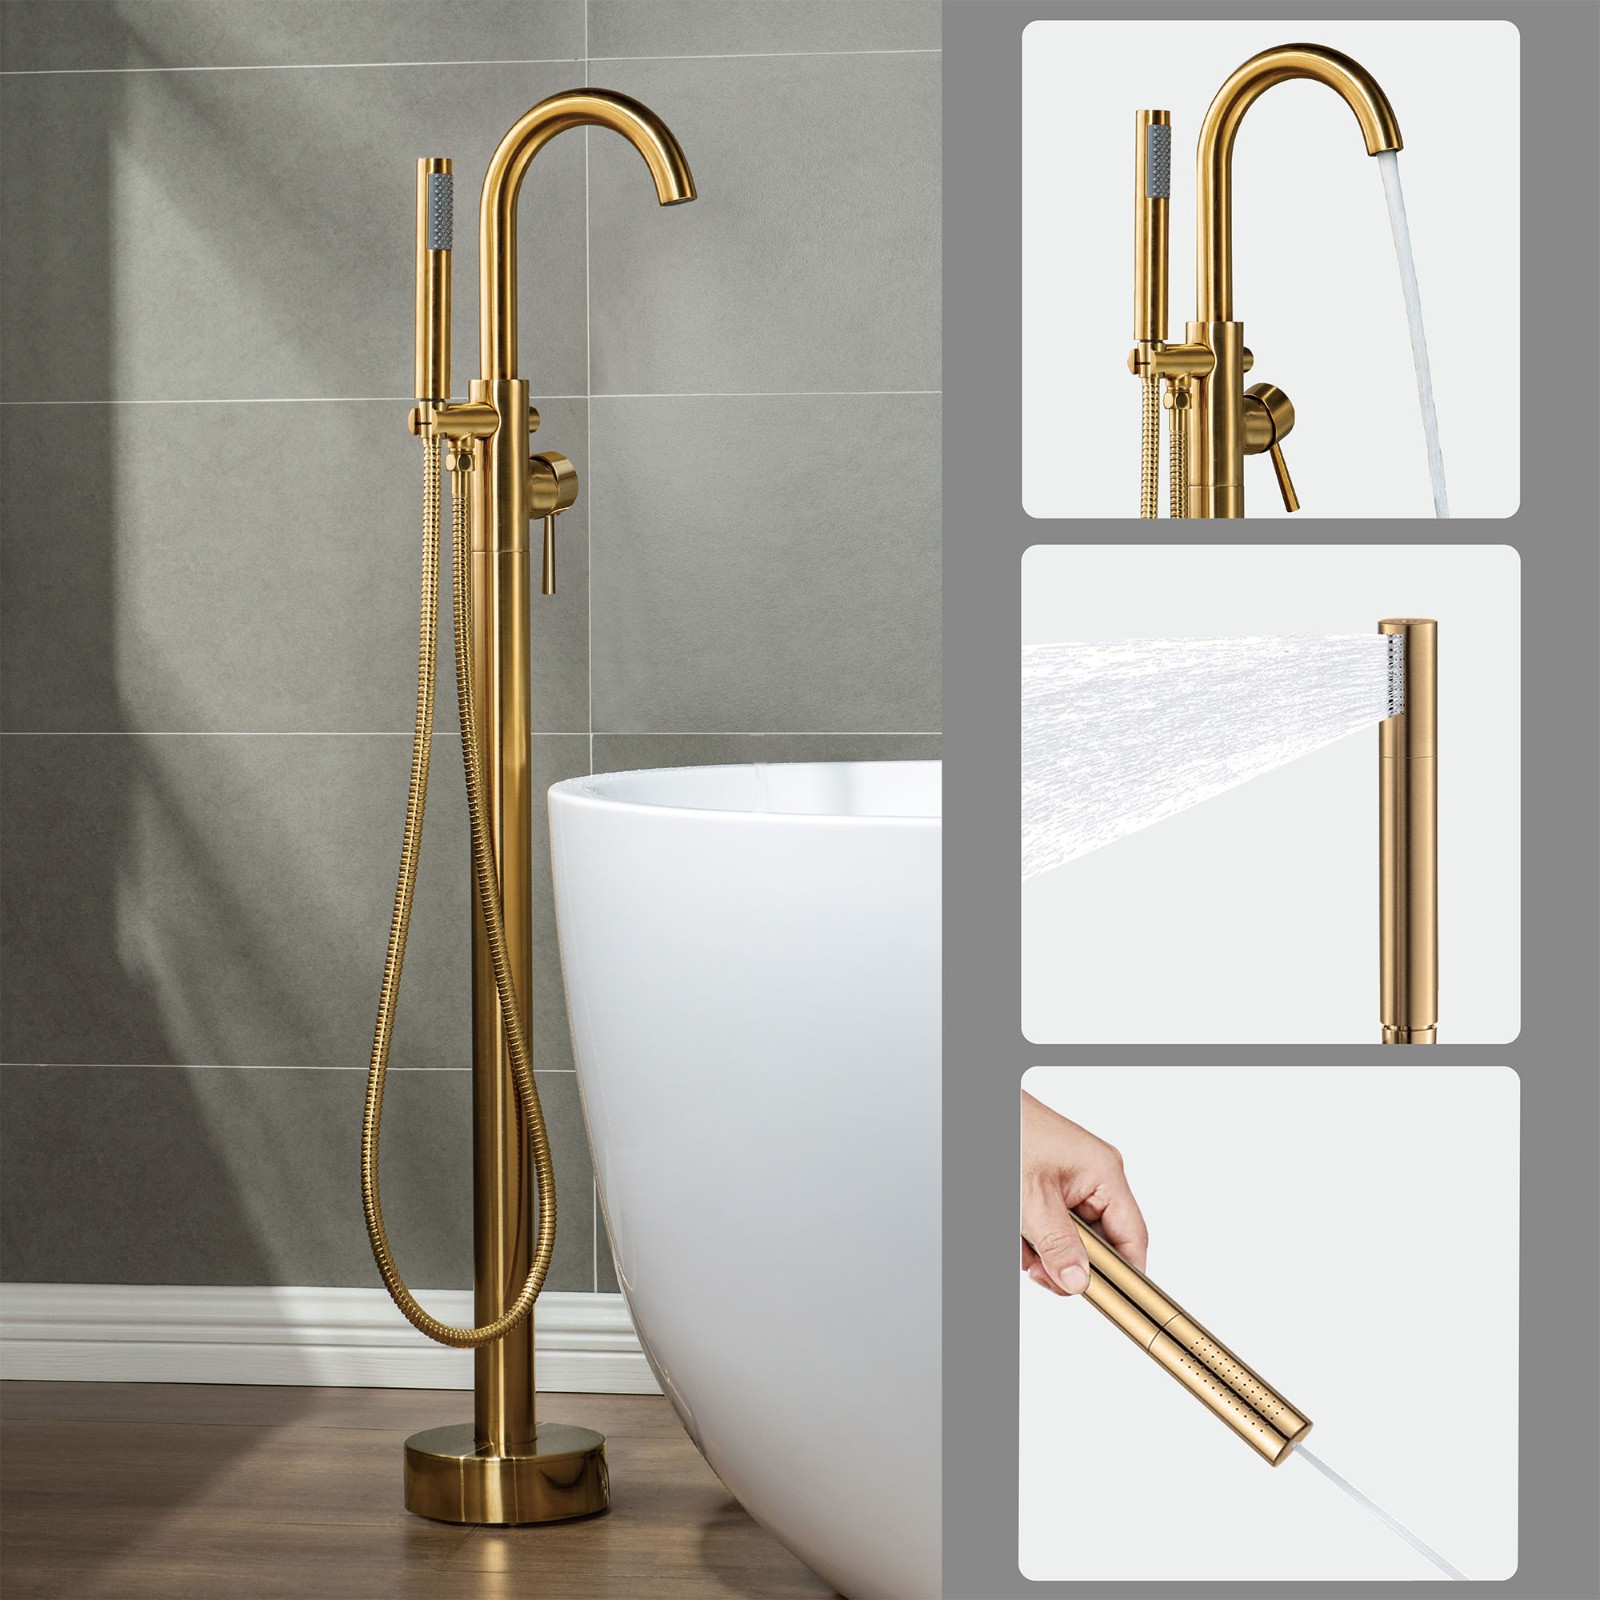  WOODBRIDGE F0007BGDR Contemporary Single Handle Floor Mount Freestanding Tub Filler Faucet with Hand shower in Brushed Gold Finish._2125